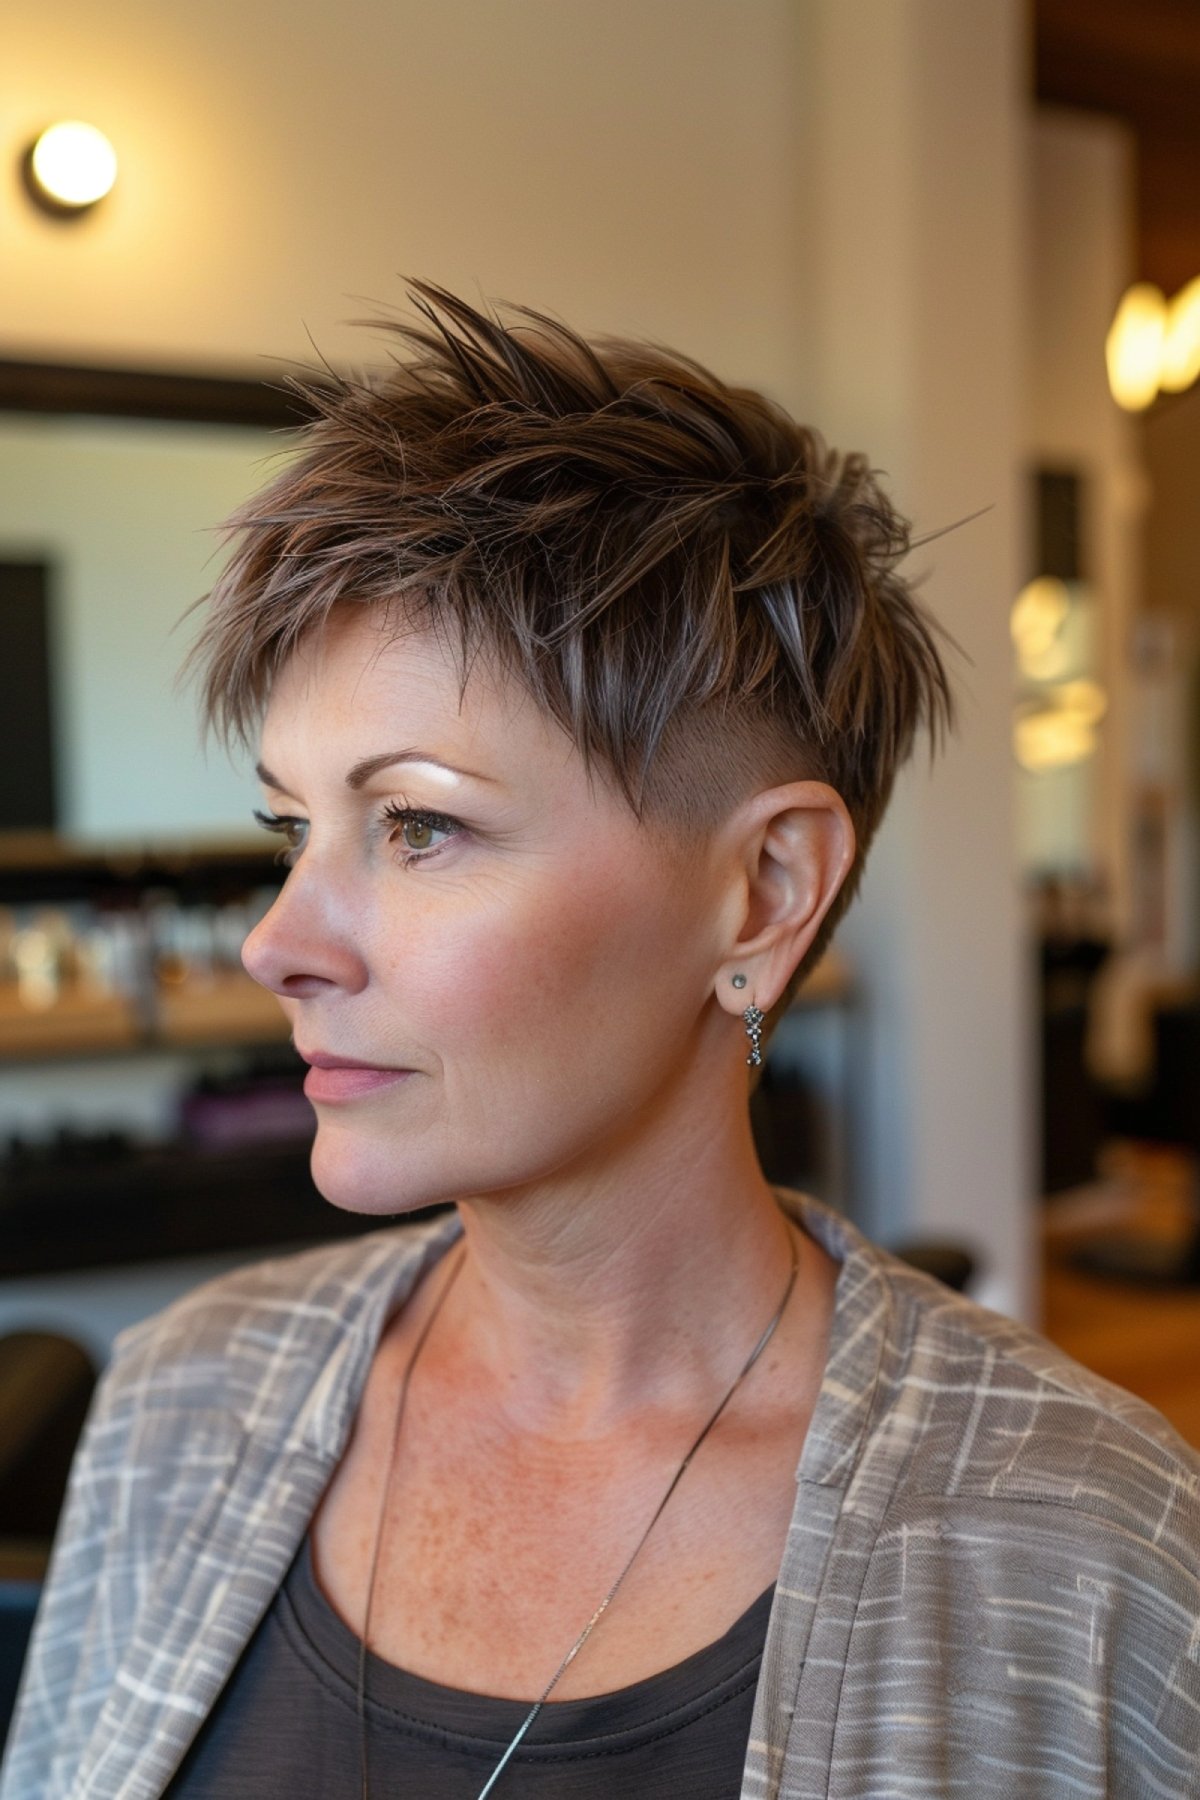 Confident Woman with Textured Spiky Pixie Cut